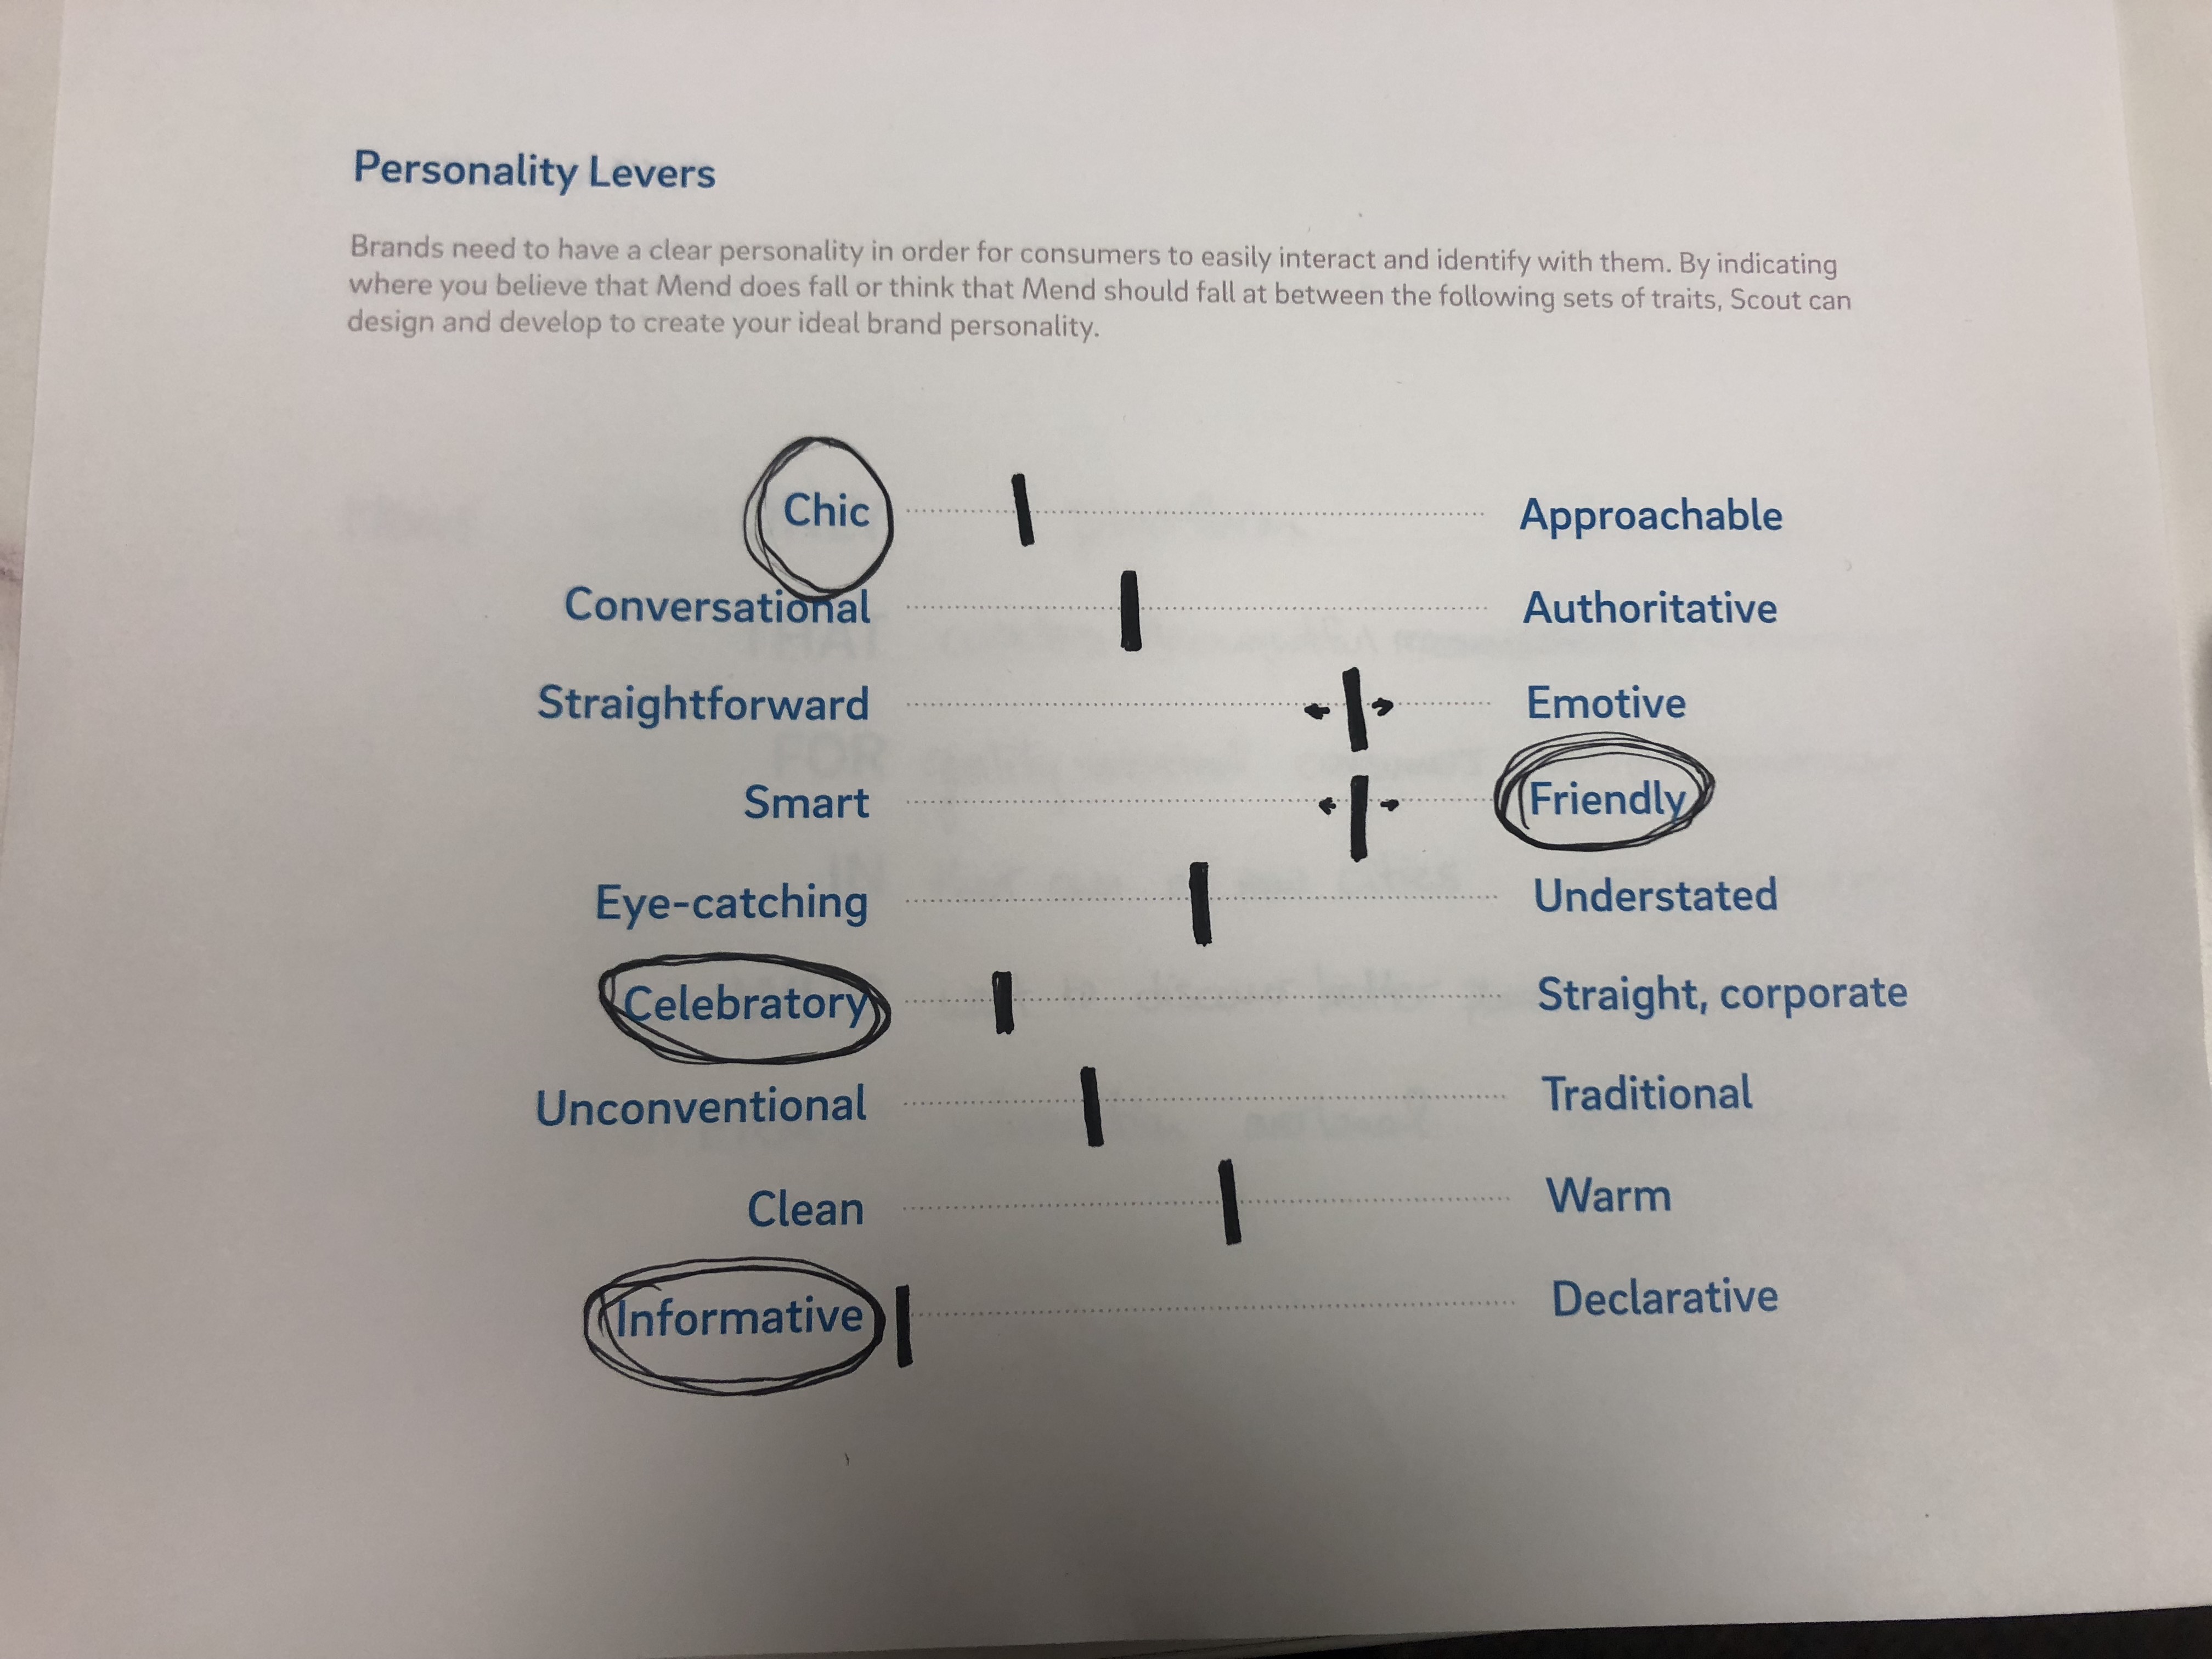 Personality Levers